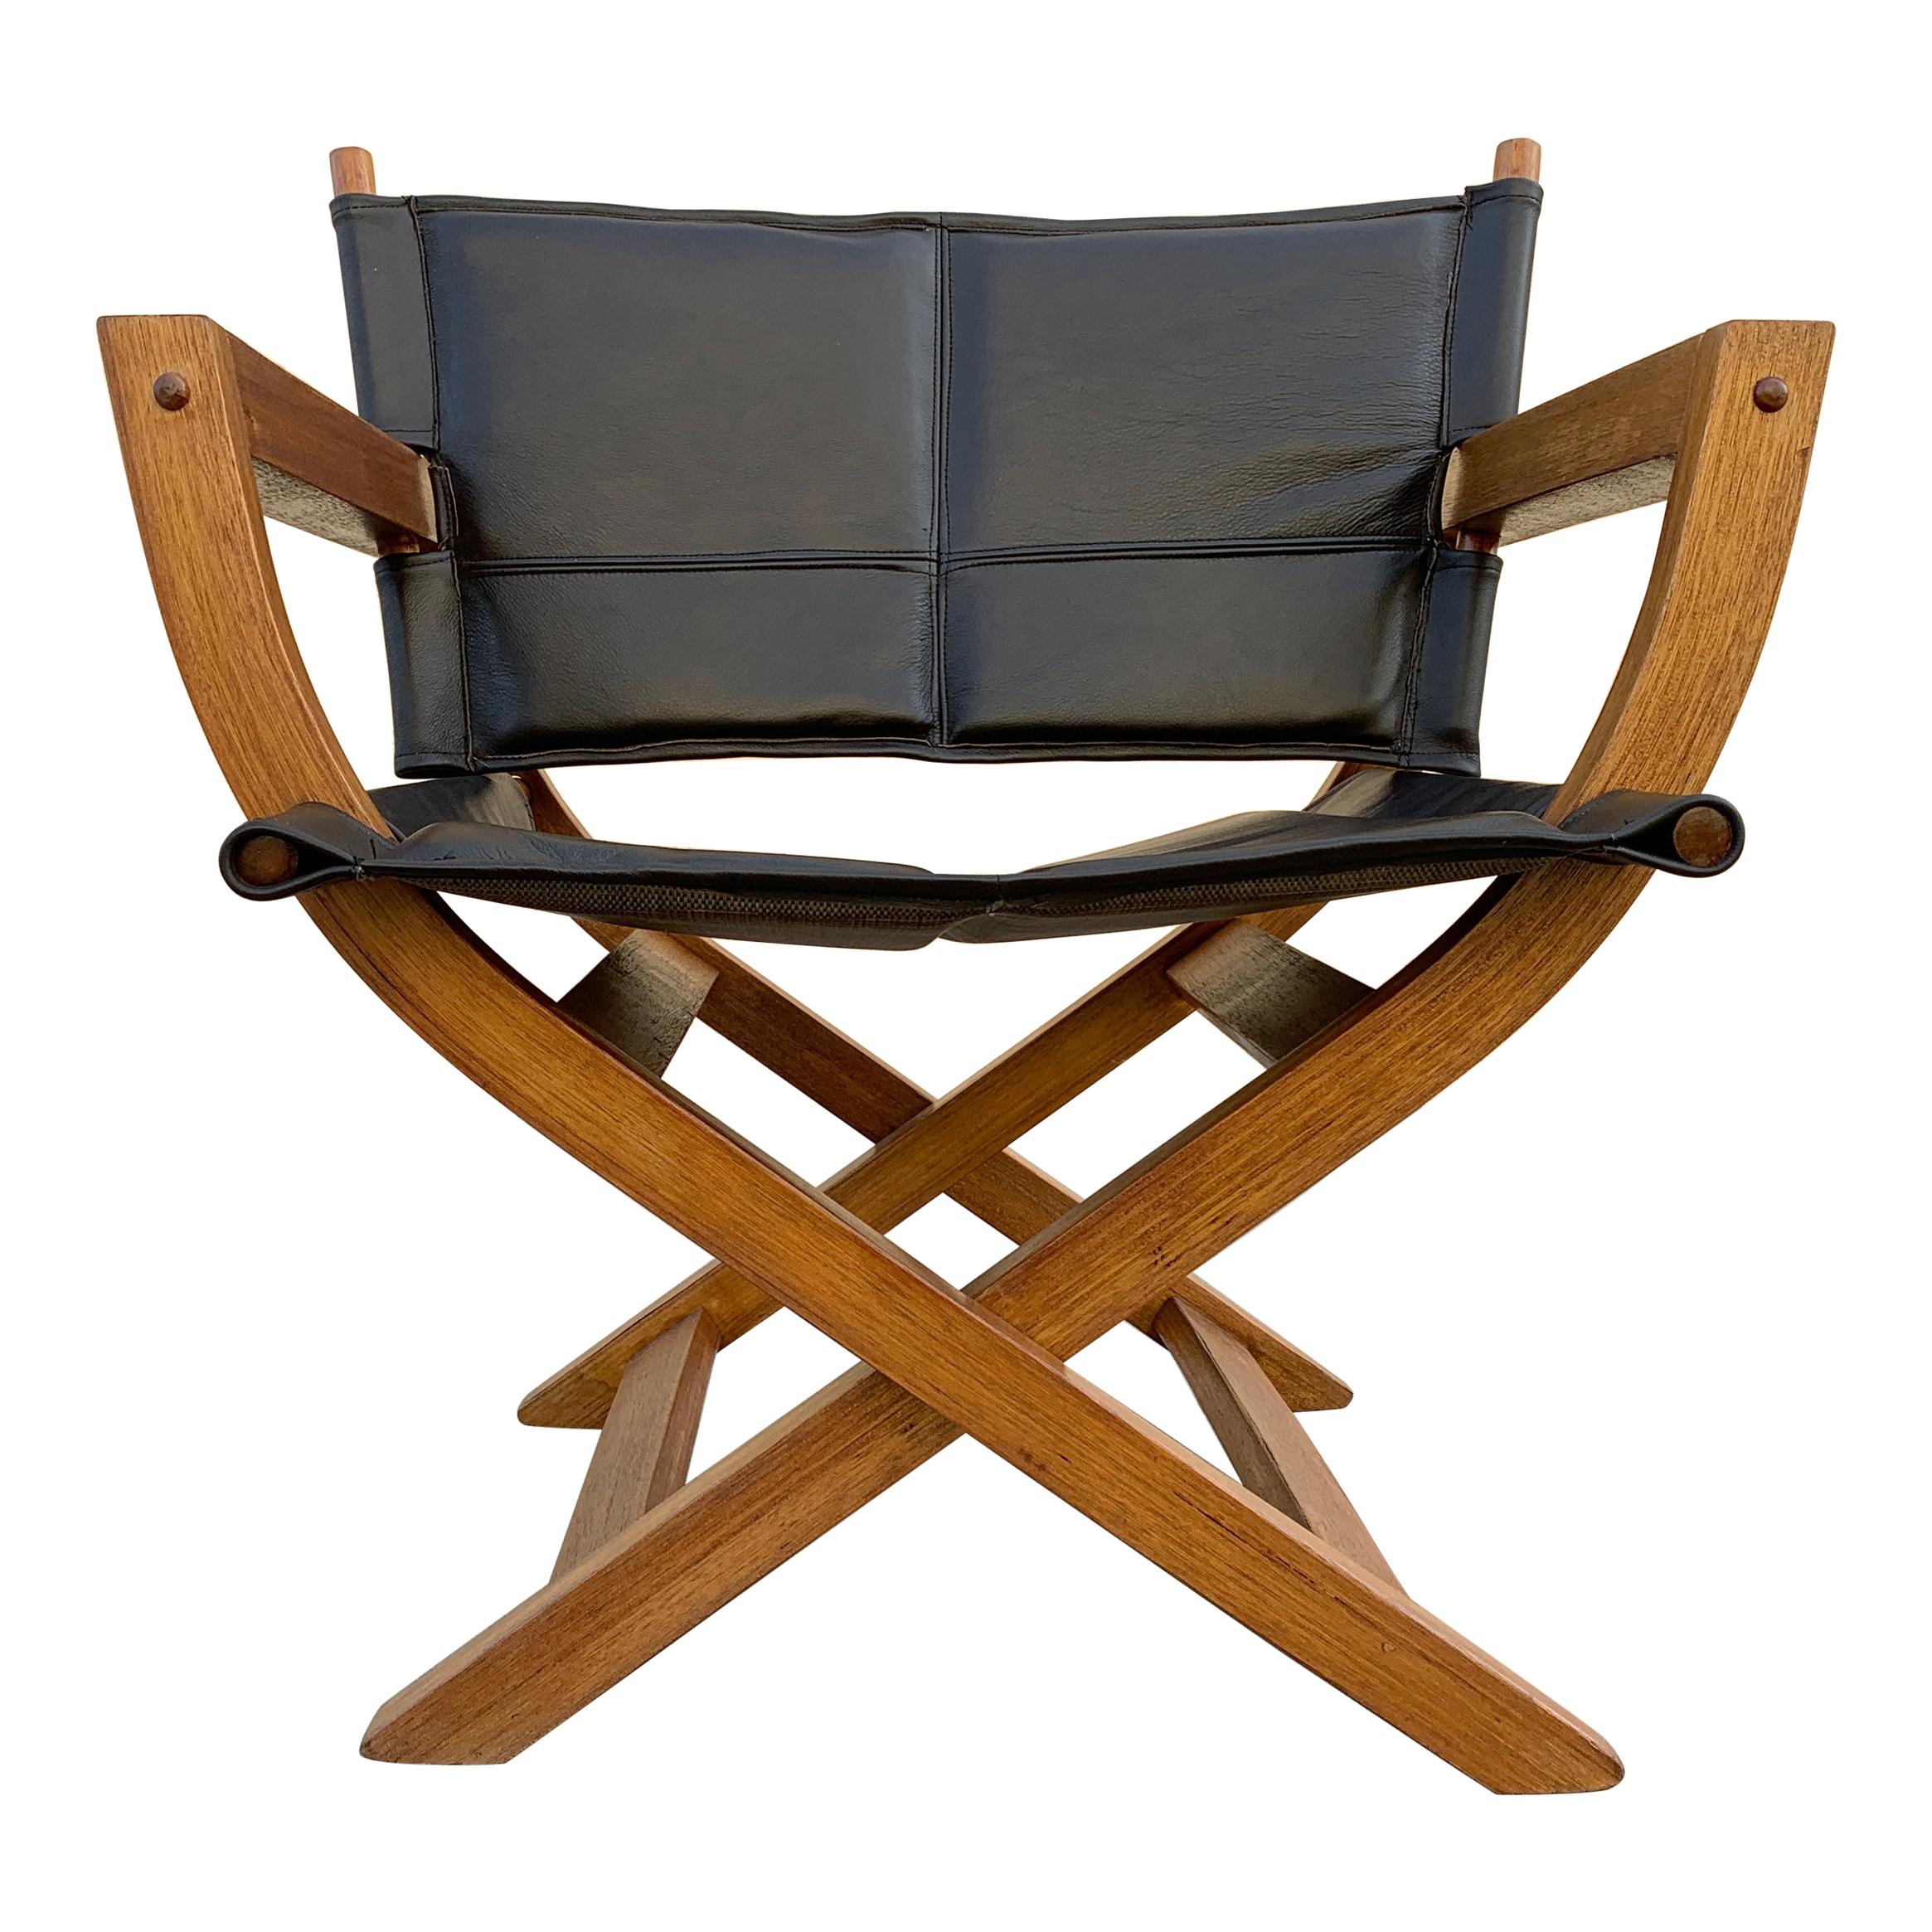 1970s Modern Teak and Leather Folding Chair, "Director's Style"